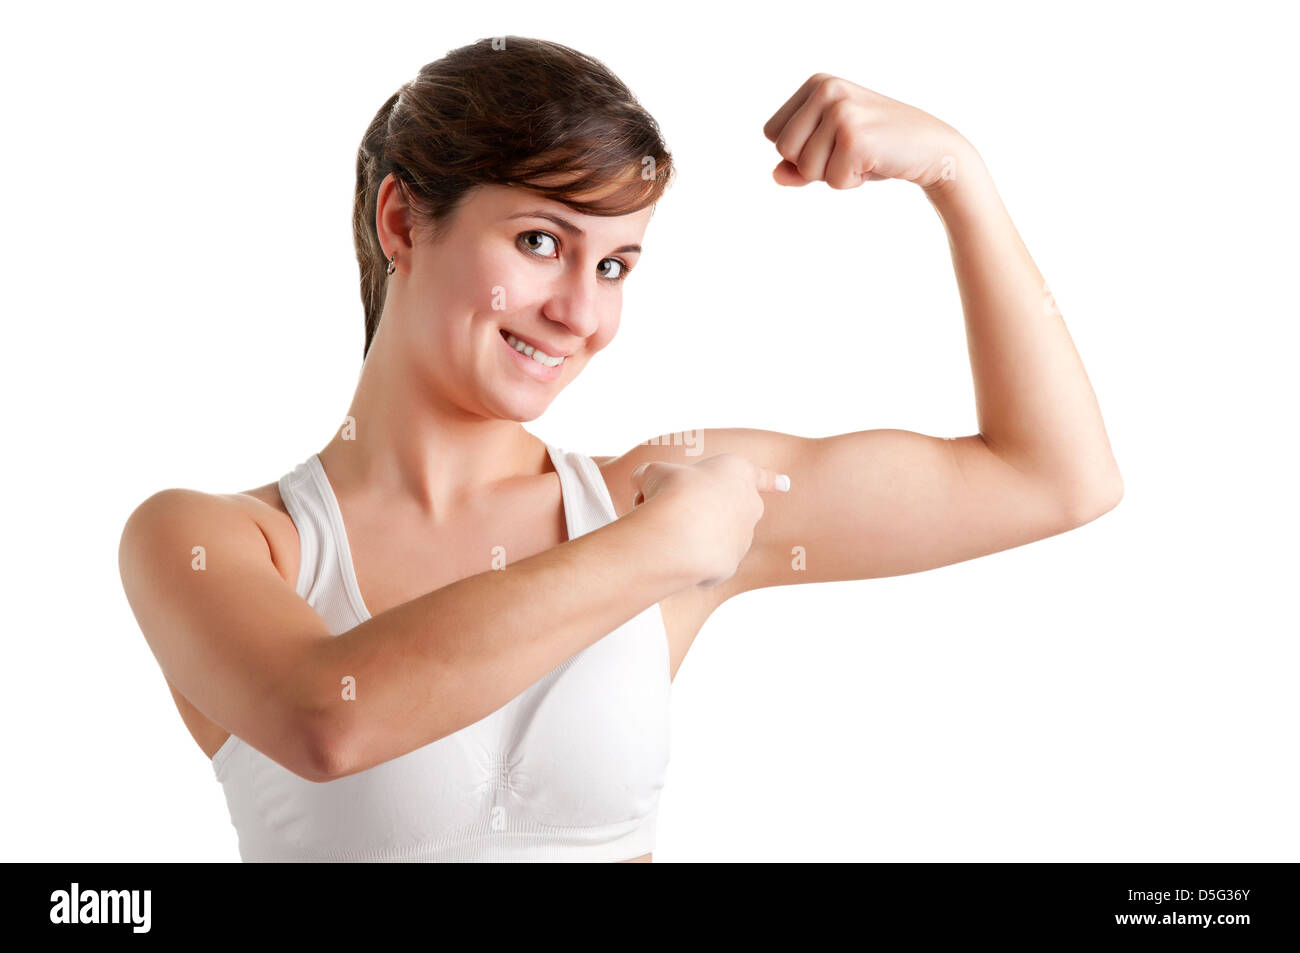 Woman smiling and pointing at her bicep after an workout, isolated in a white background Stock Photo